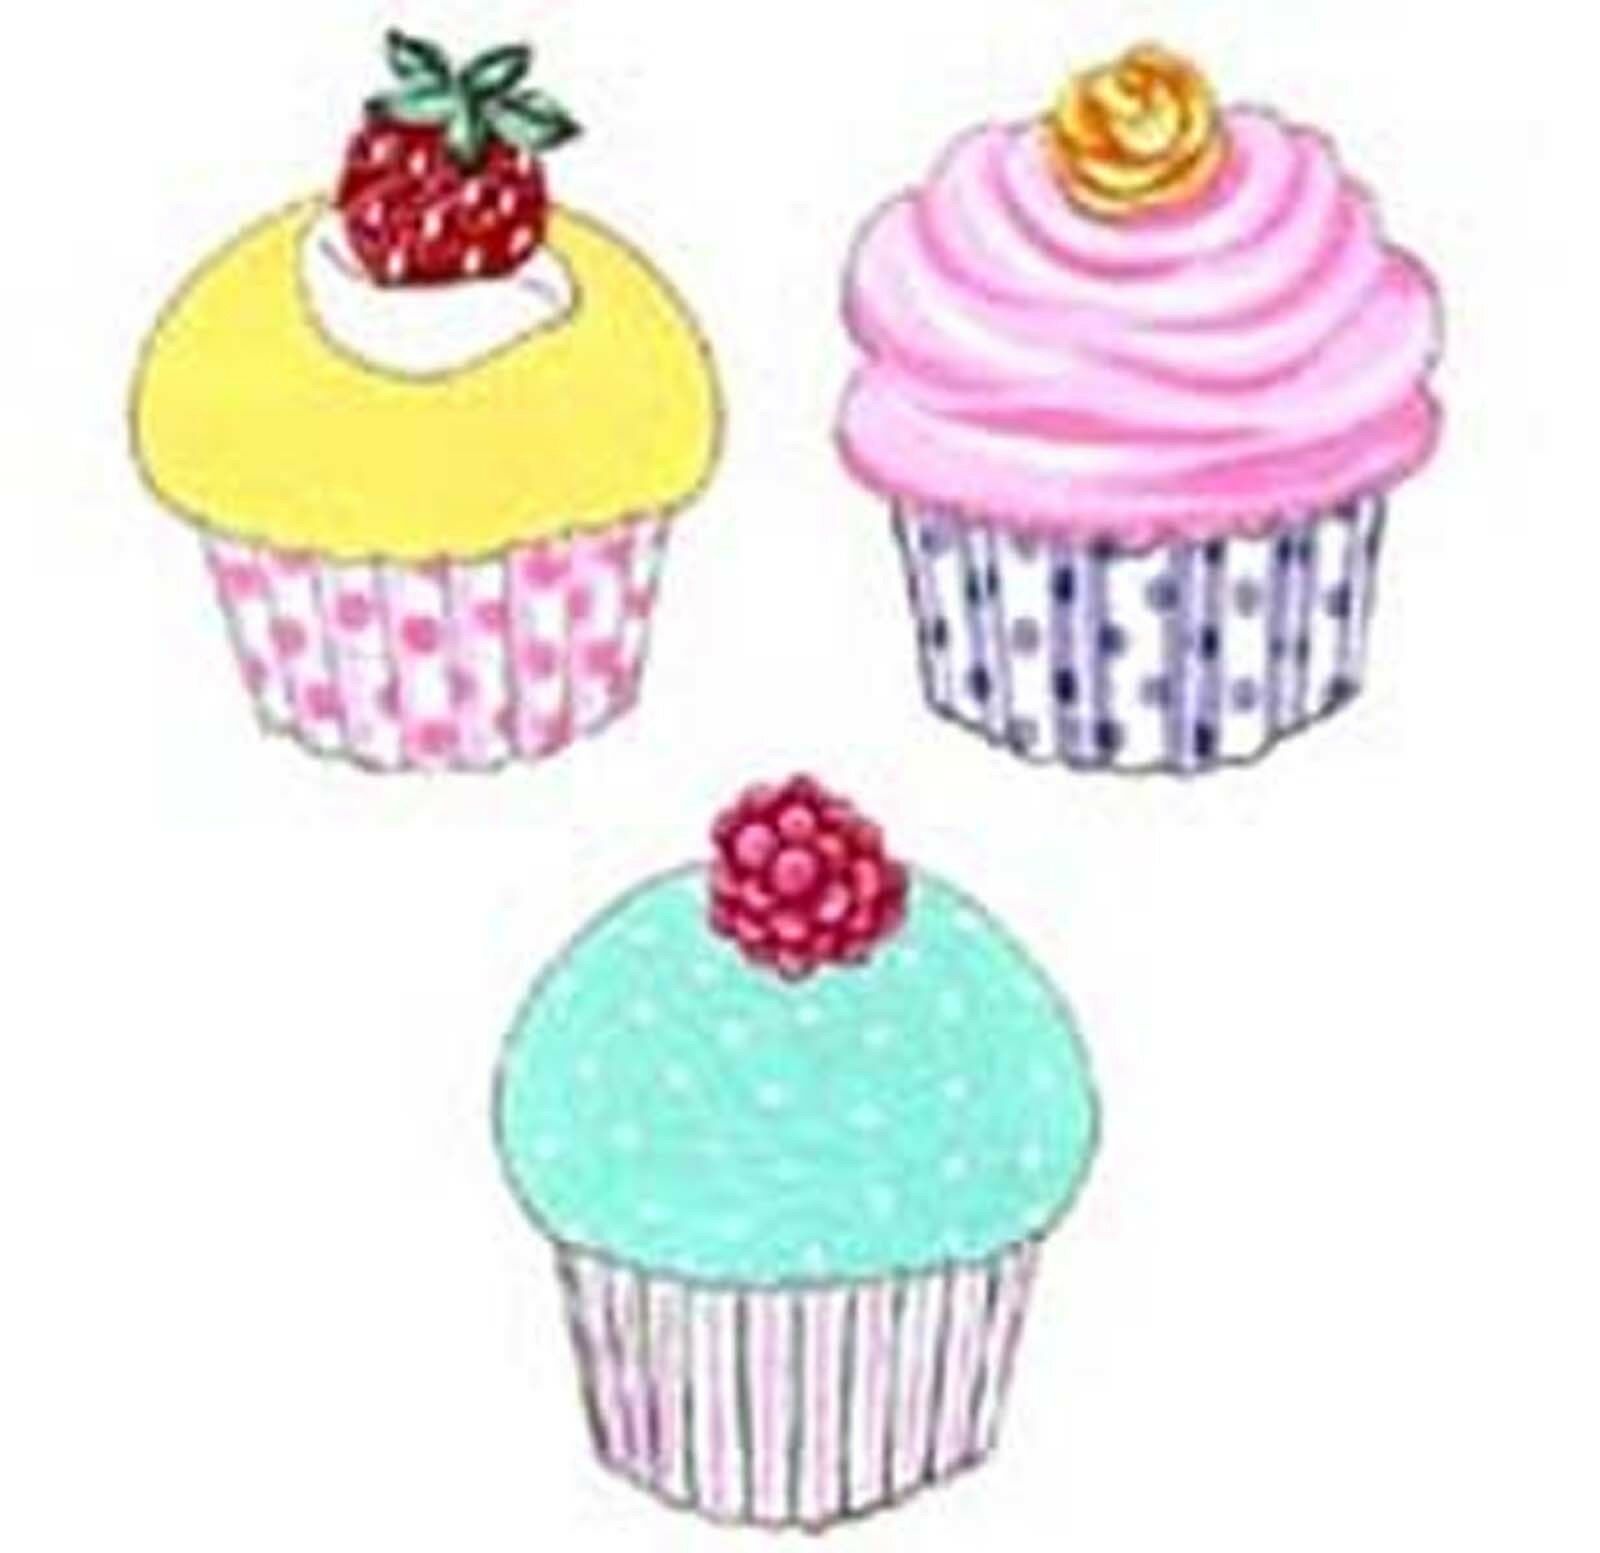 Cupcake Frosted Cup Cake Dessert Select-a-size Waterslide Ceramic Decals Bx